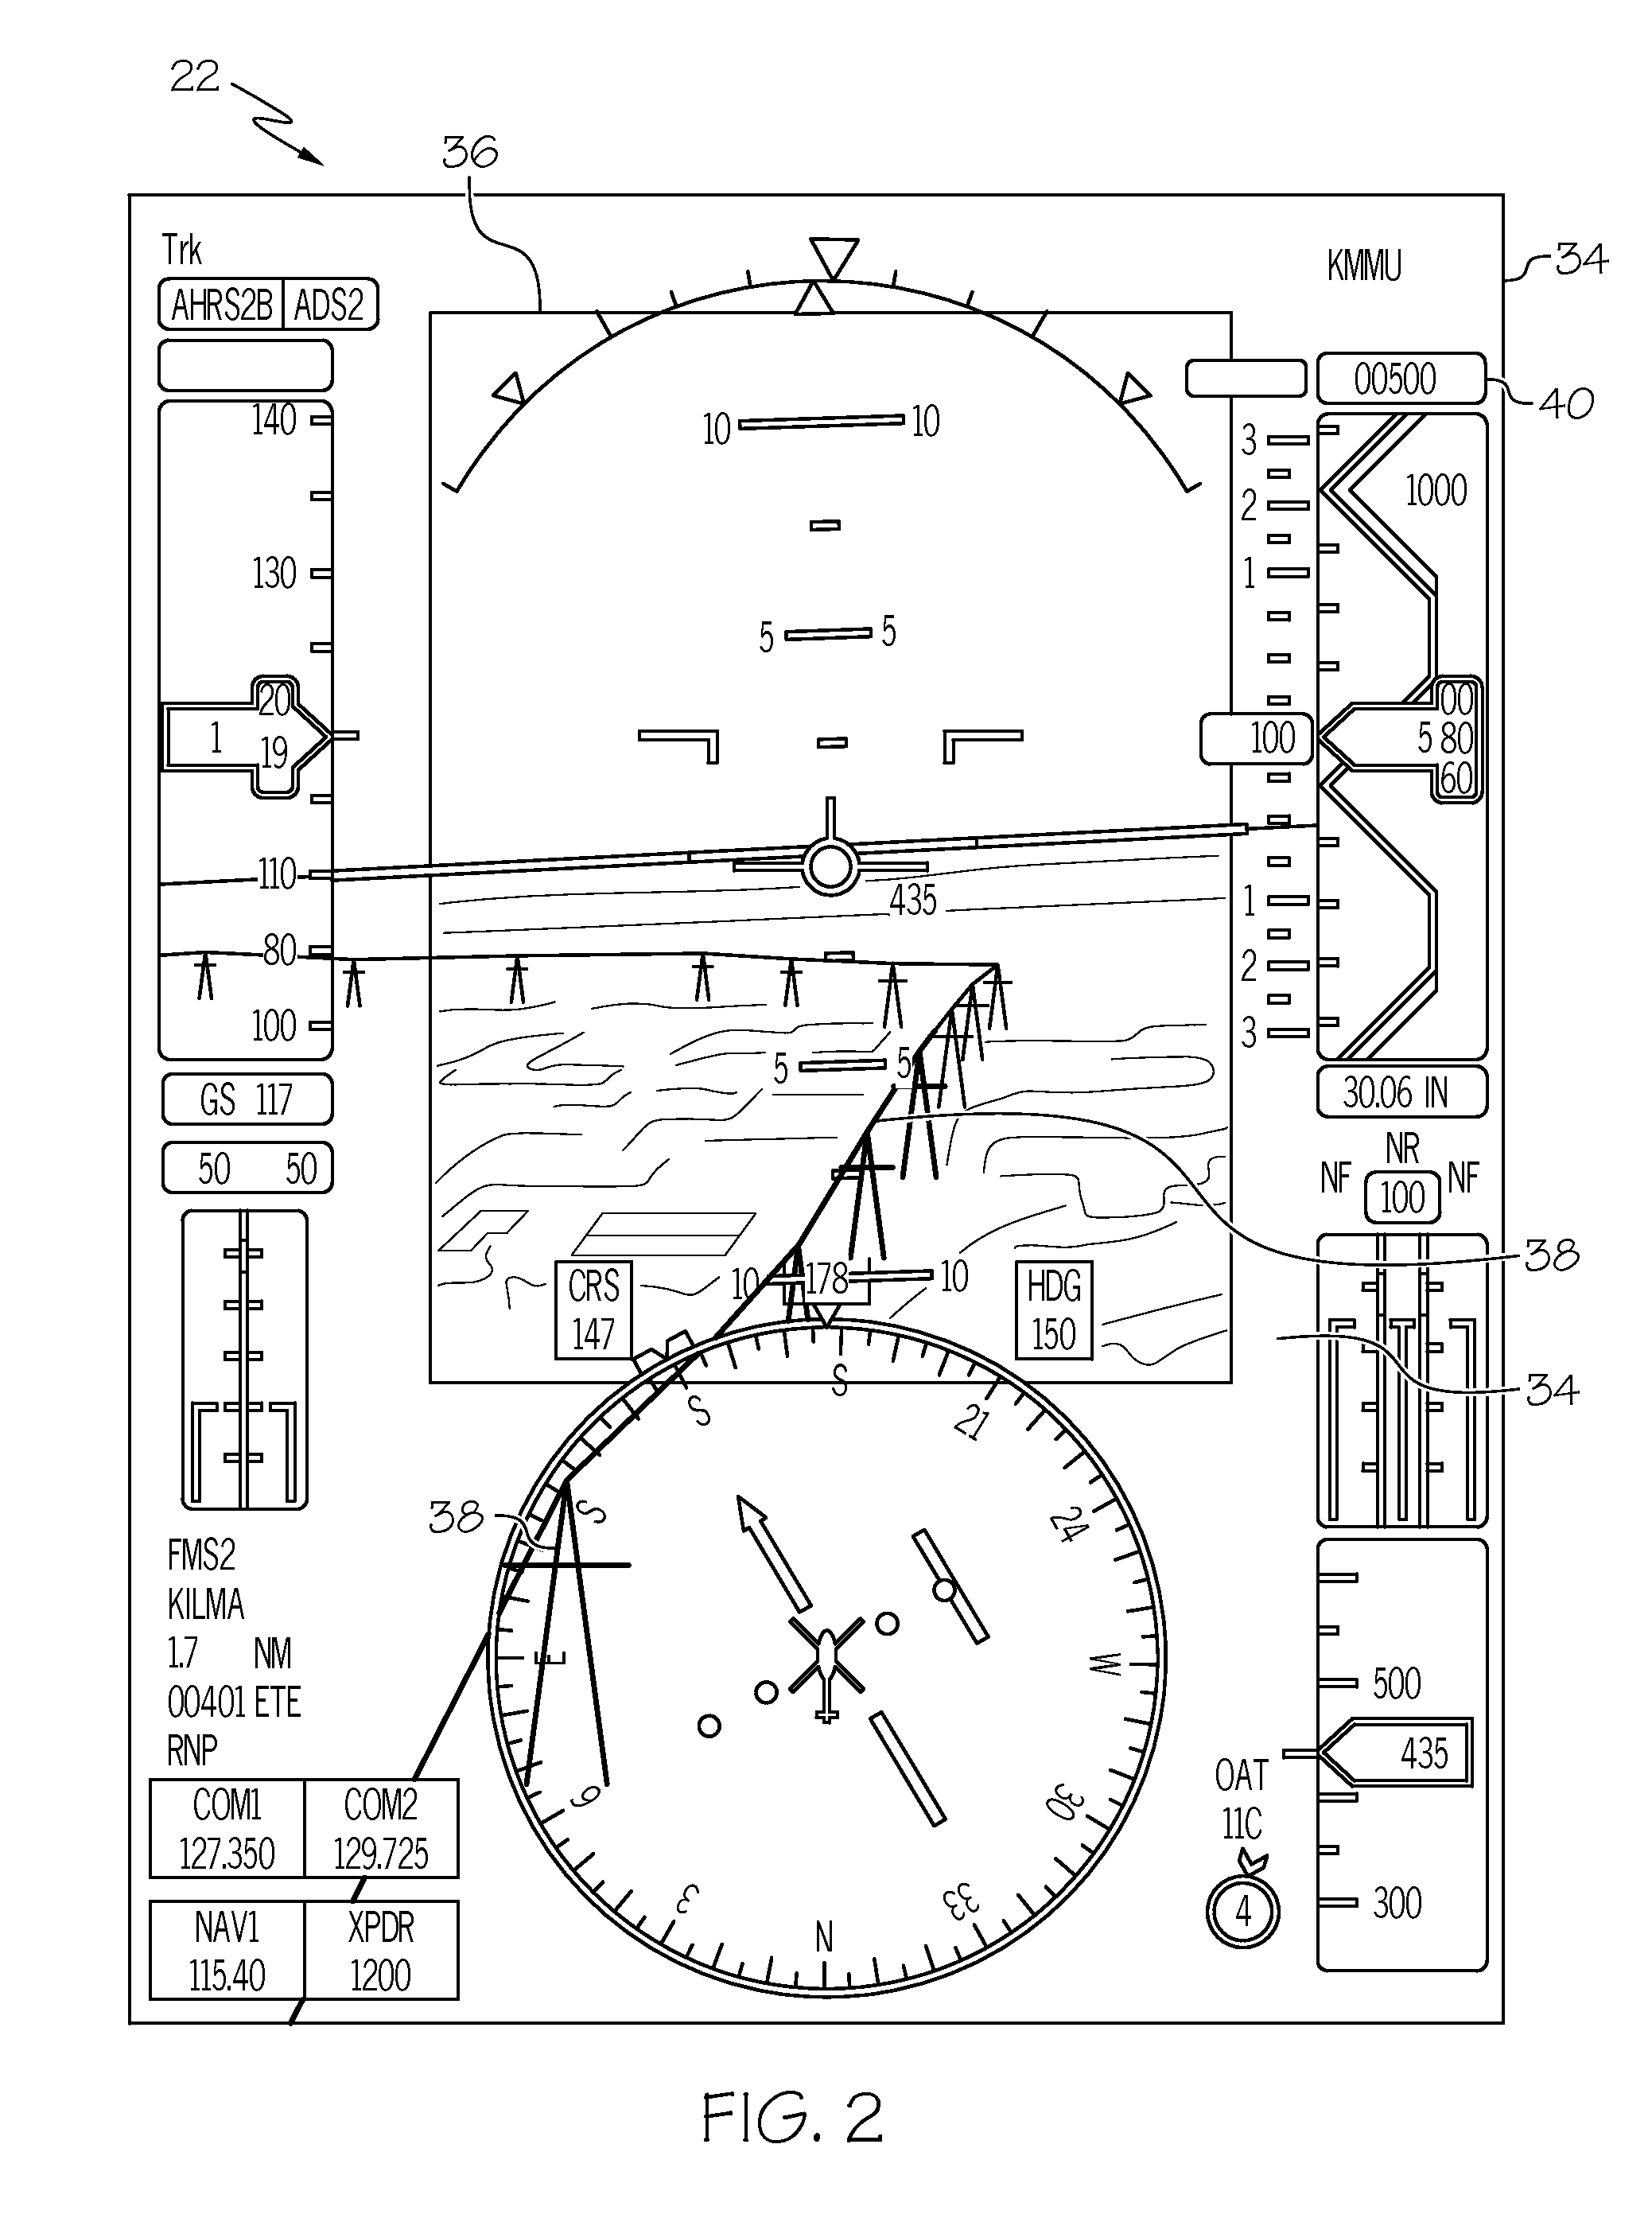 Aircraft flight deck displays and systems and methods for enhanced display of obstacles in a combined vision display